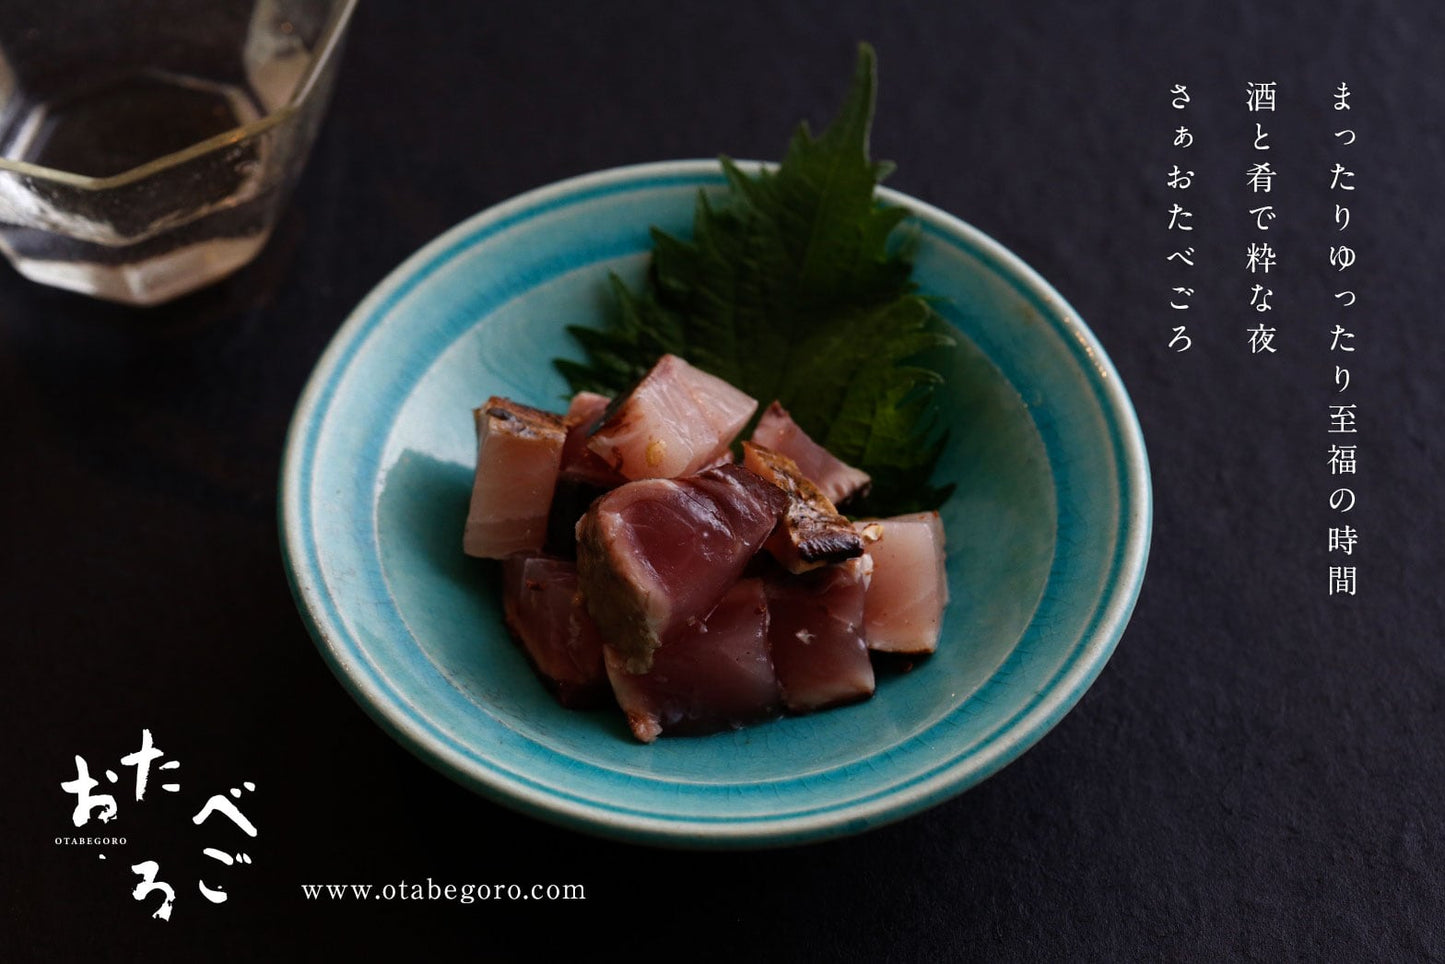 Subscription “Campaizen” Subscription with a set of raw sake and Tosa’s “Otabegoro” products